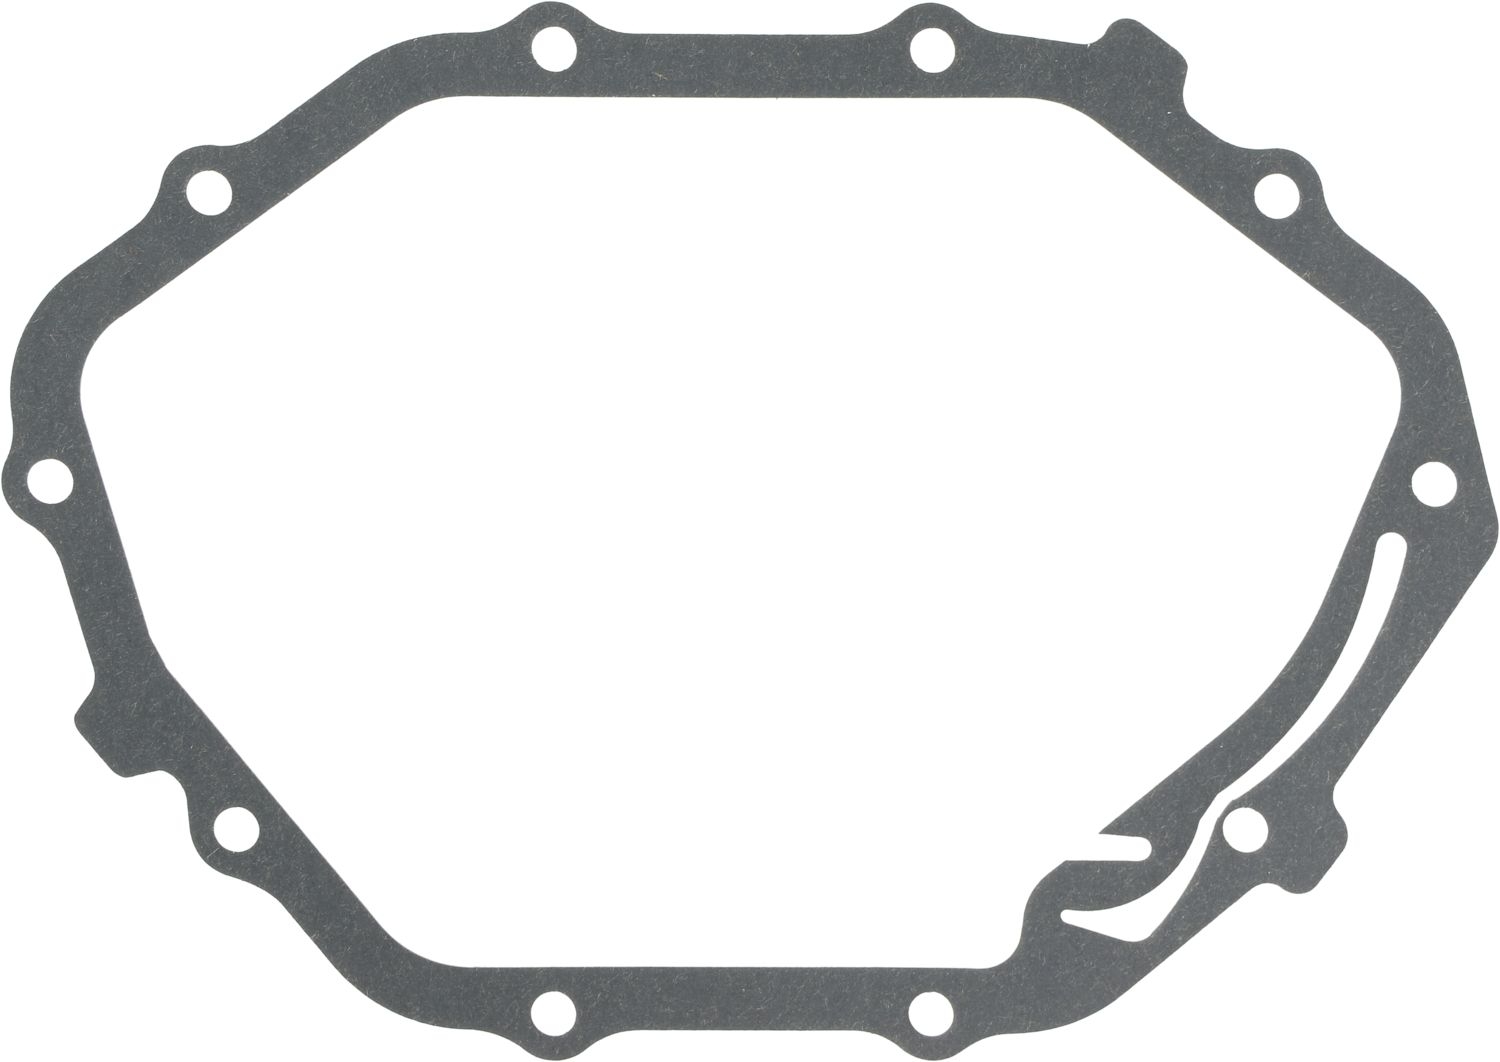 VICTOR REINZ - Automatic Transmission Differential Carrier Gasket - VRZ 71-14880-00